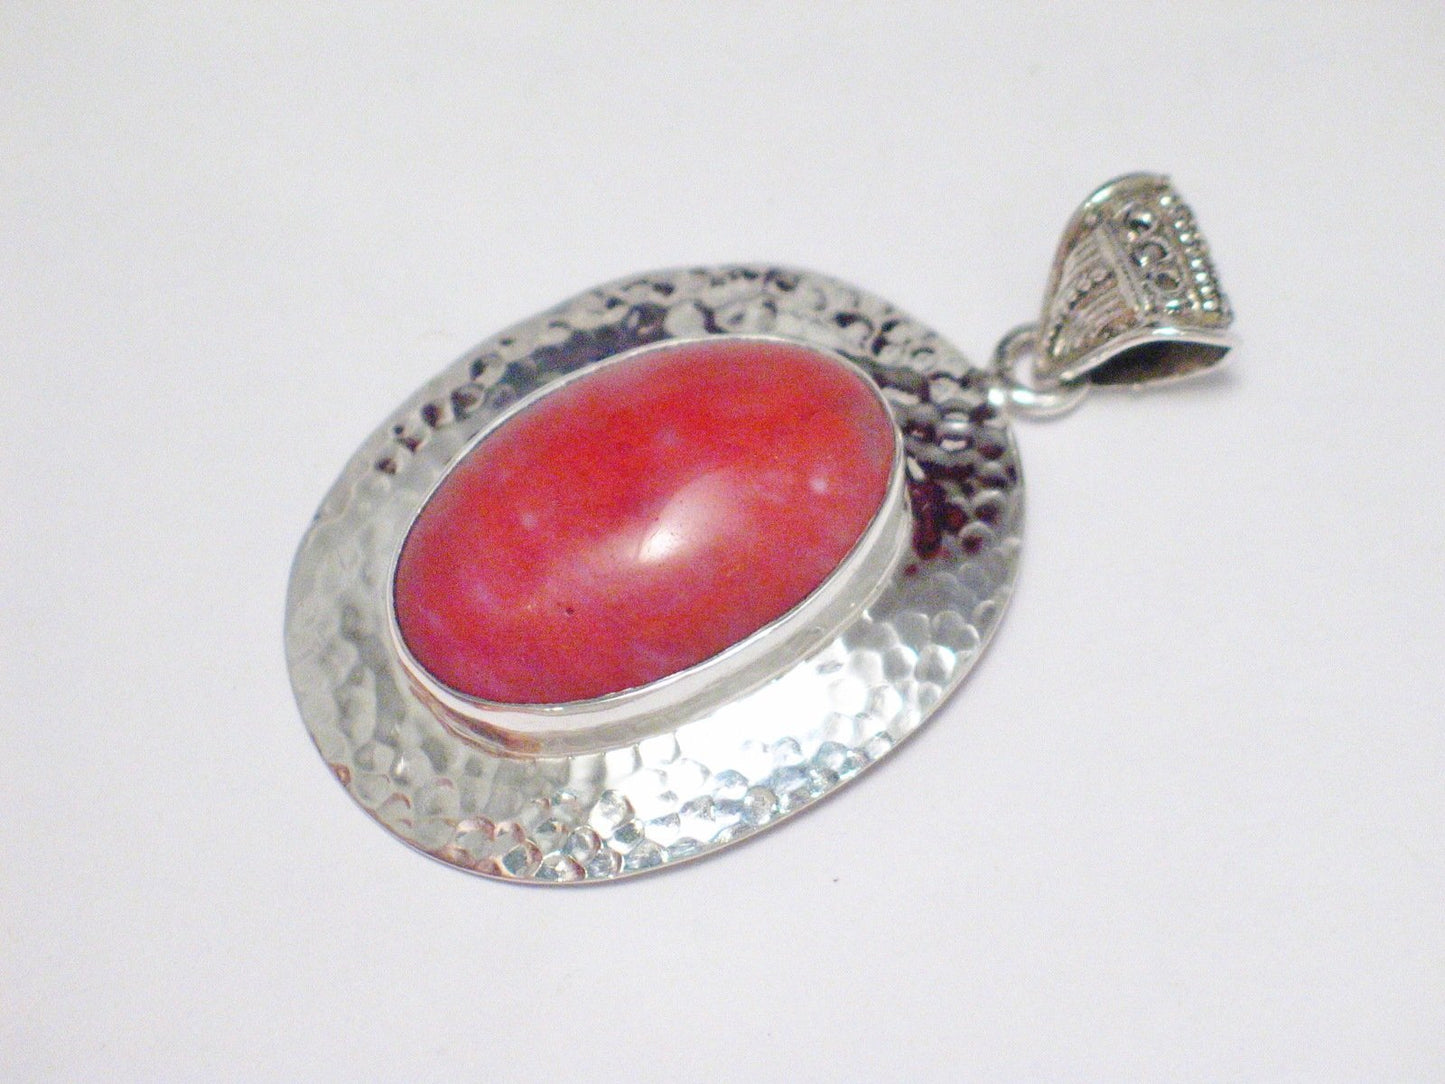 Pendant | Large Sterling Silver Oval Hammered Cherry Quartz Pendant | Best discount prices on Overstock Jewelry only at Blingschlingers.com online website